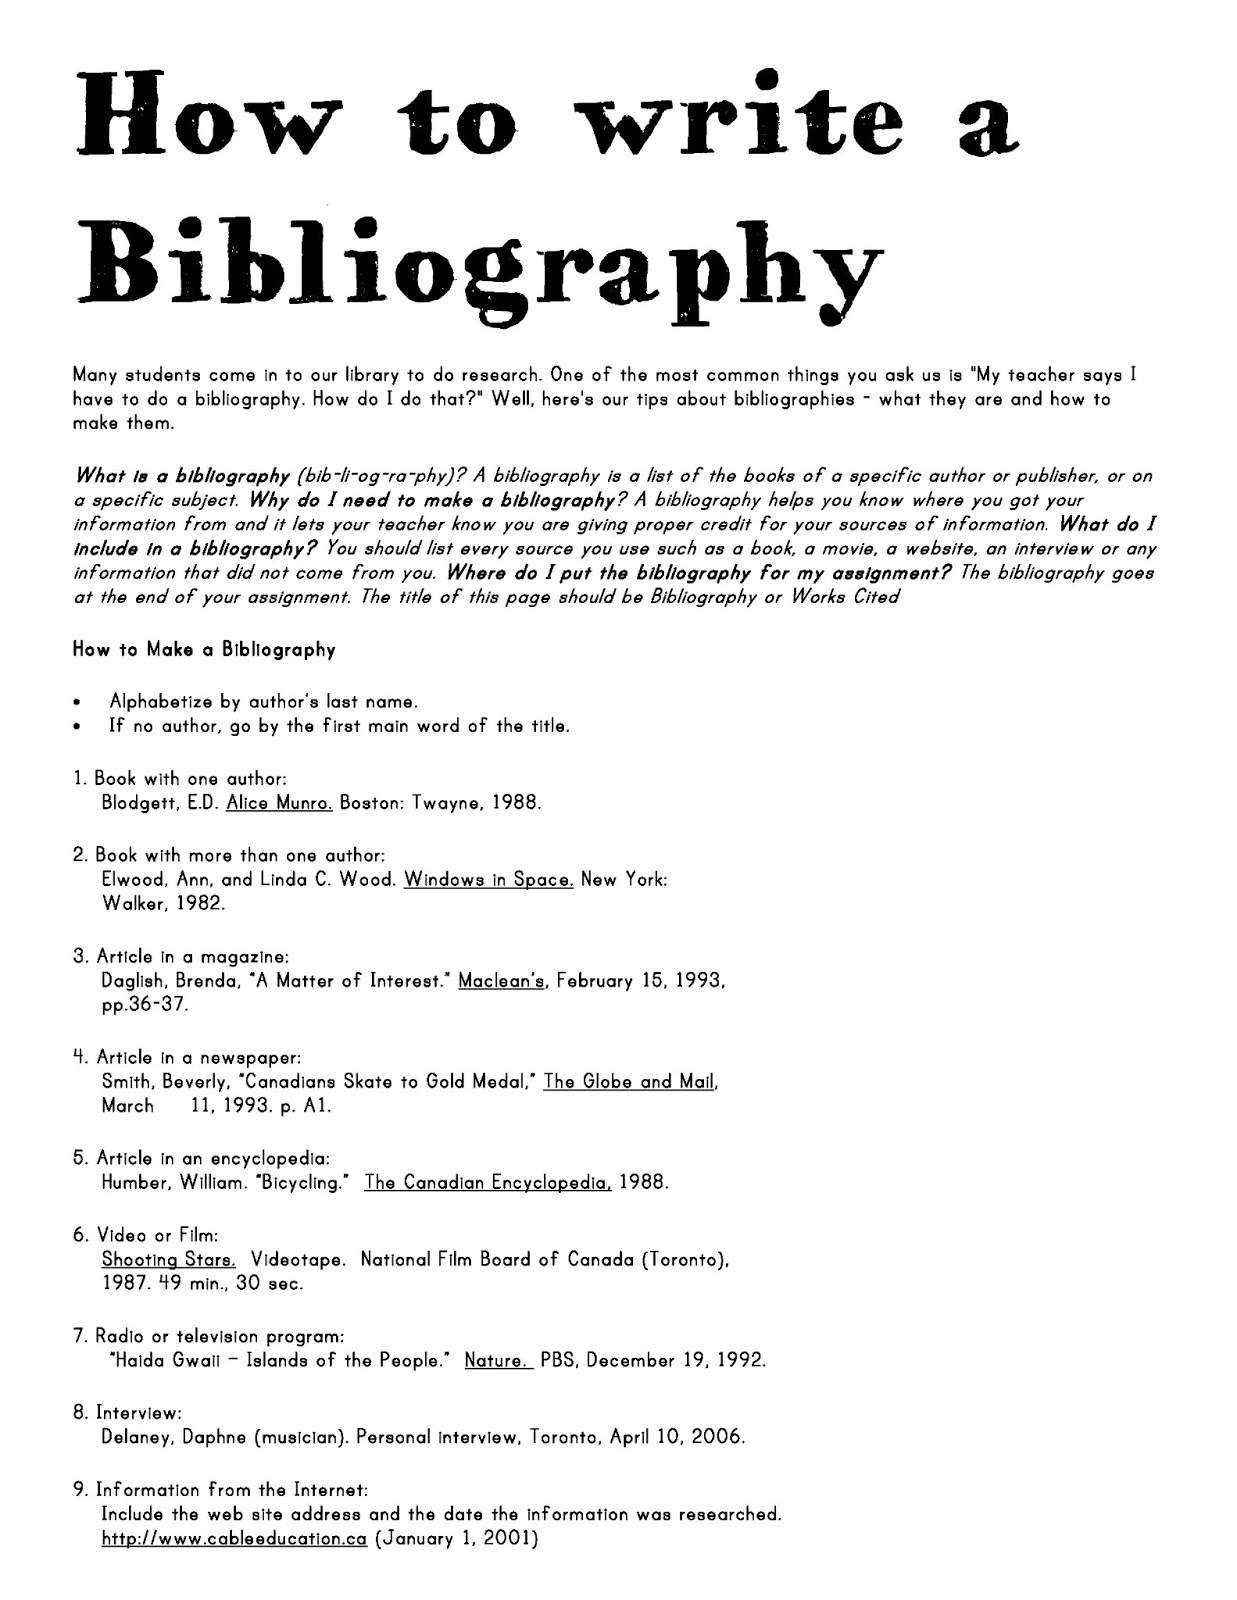 Writing a bibliography for internet sites